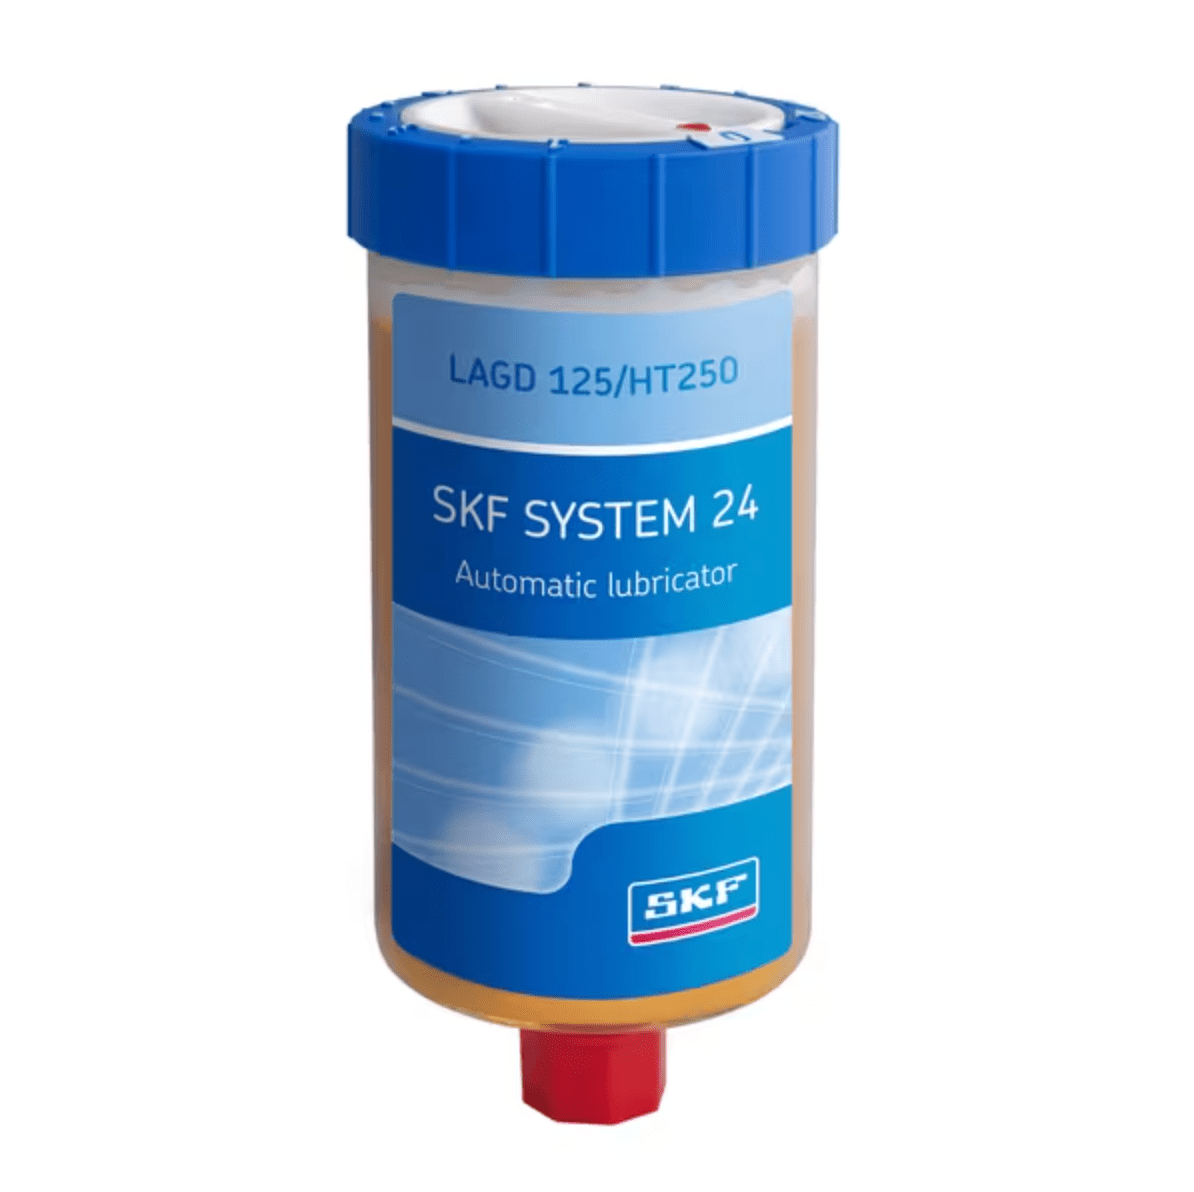 SKF LAGD 125/HT250 Automatic lubricator with LHHT 250 High temperature oil , 125ml - Apollo Industries llc